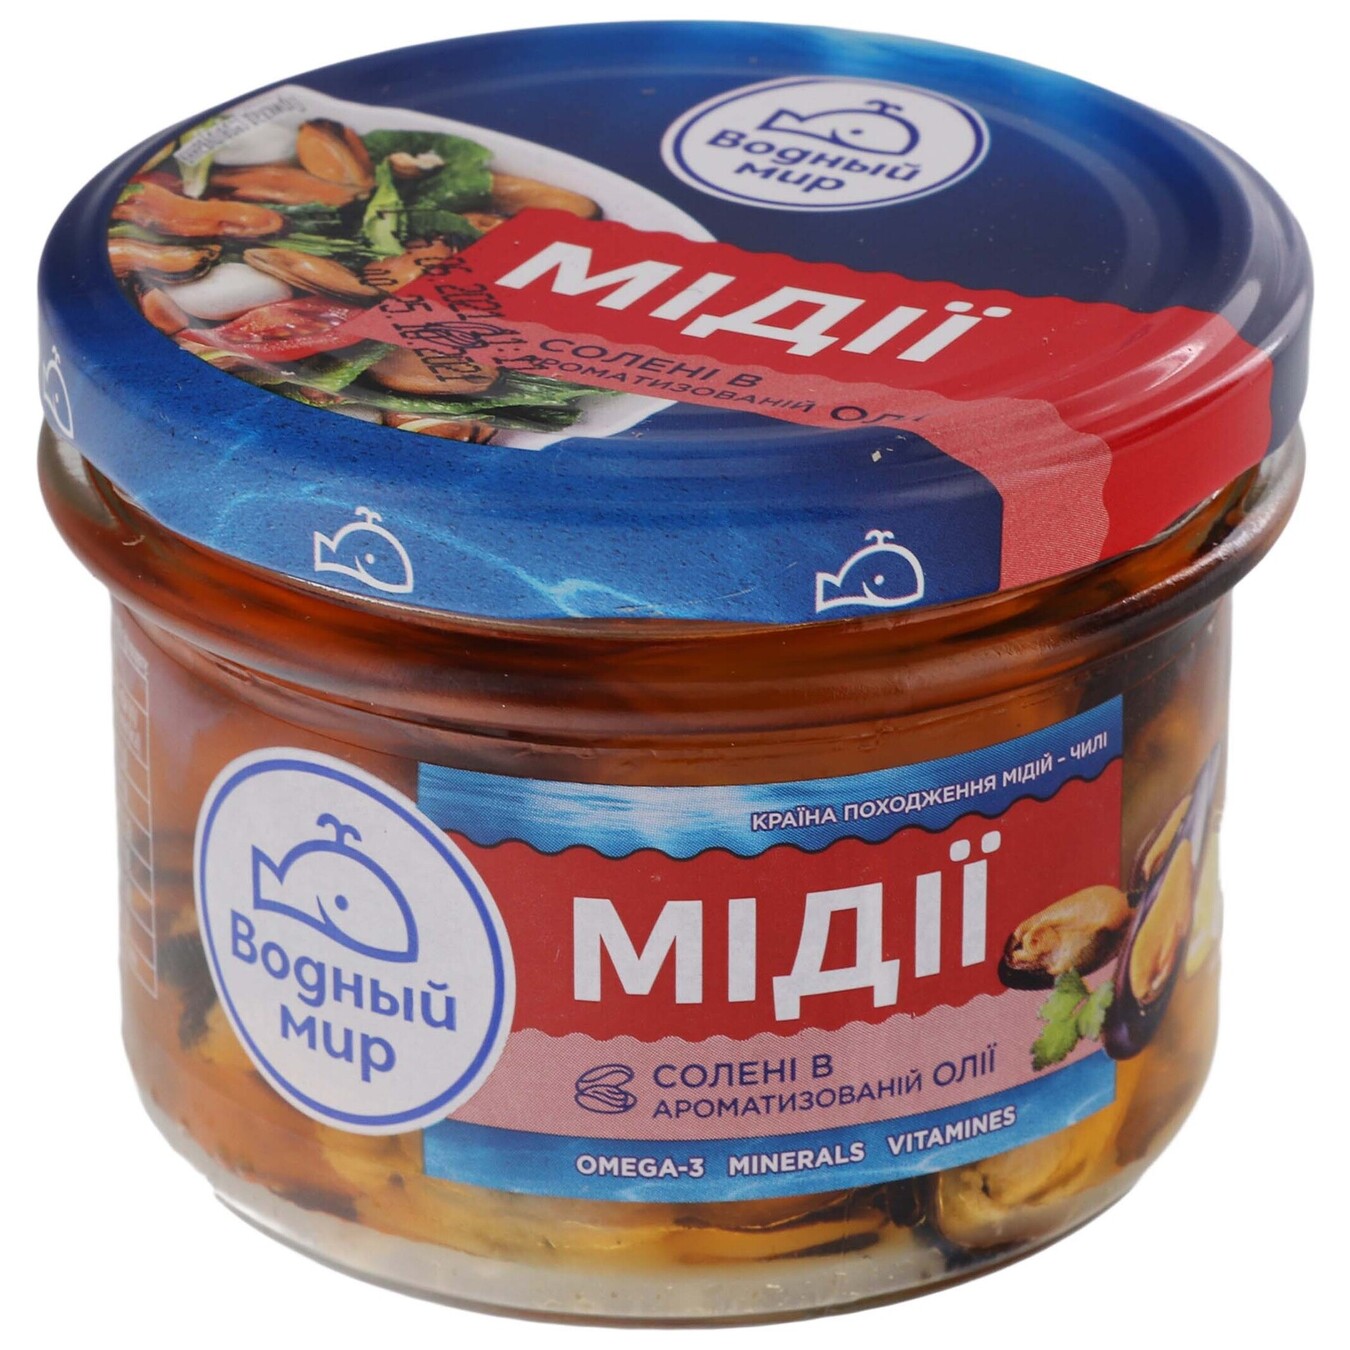 Vodnyy myr Meat of mussels in flavored oil 170g 2